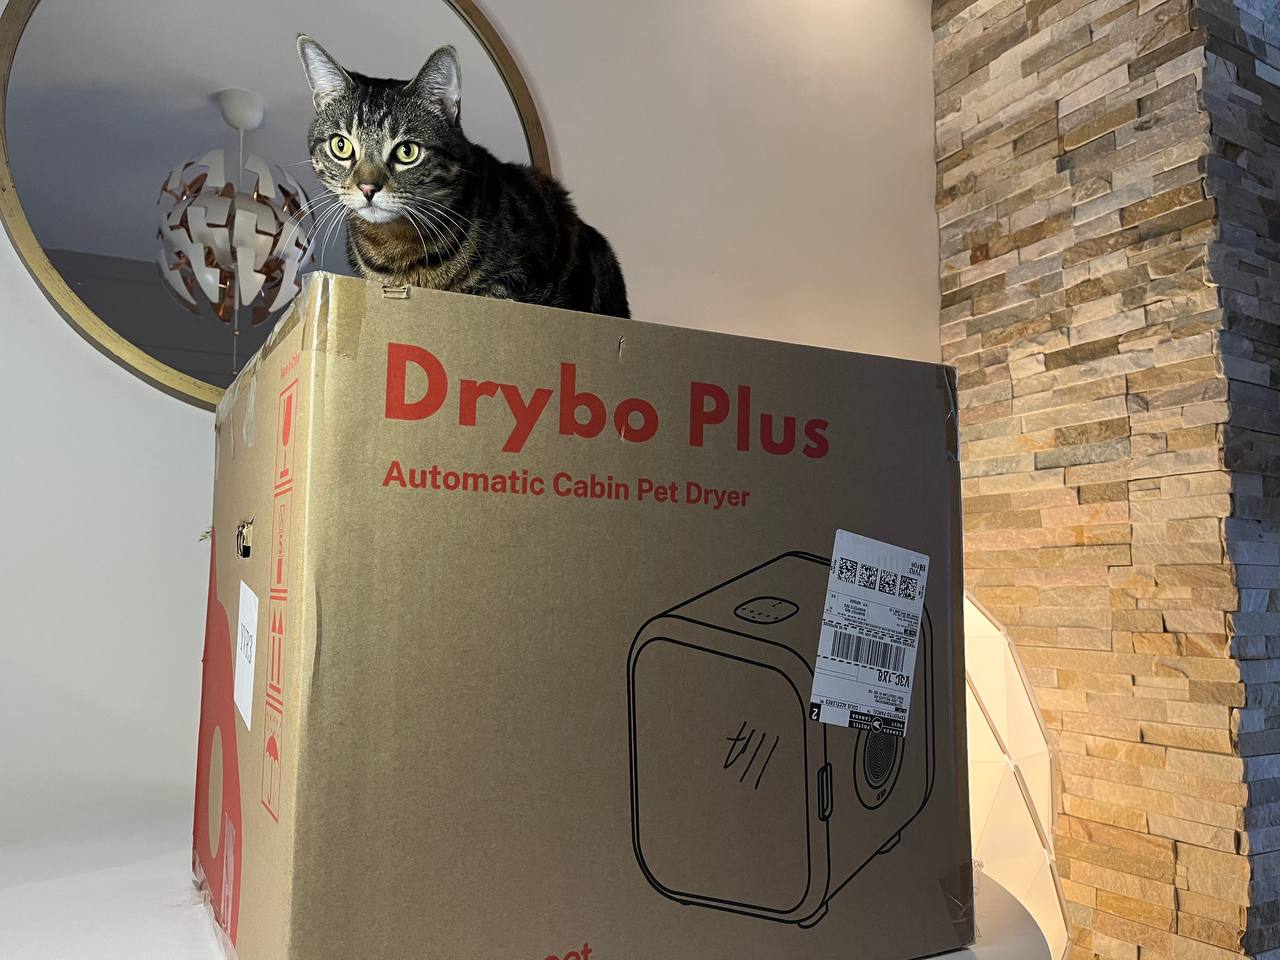 My cat and Drybo Plus Pet Dryer in the box